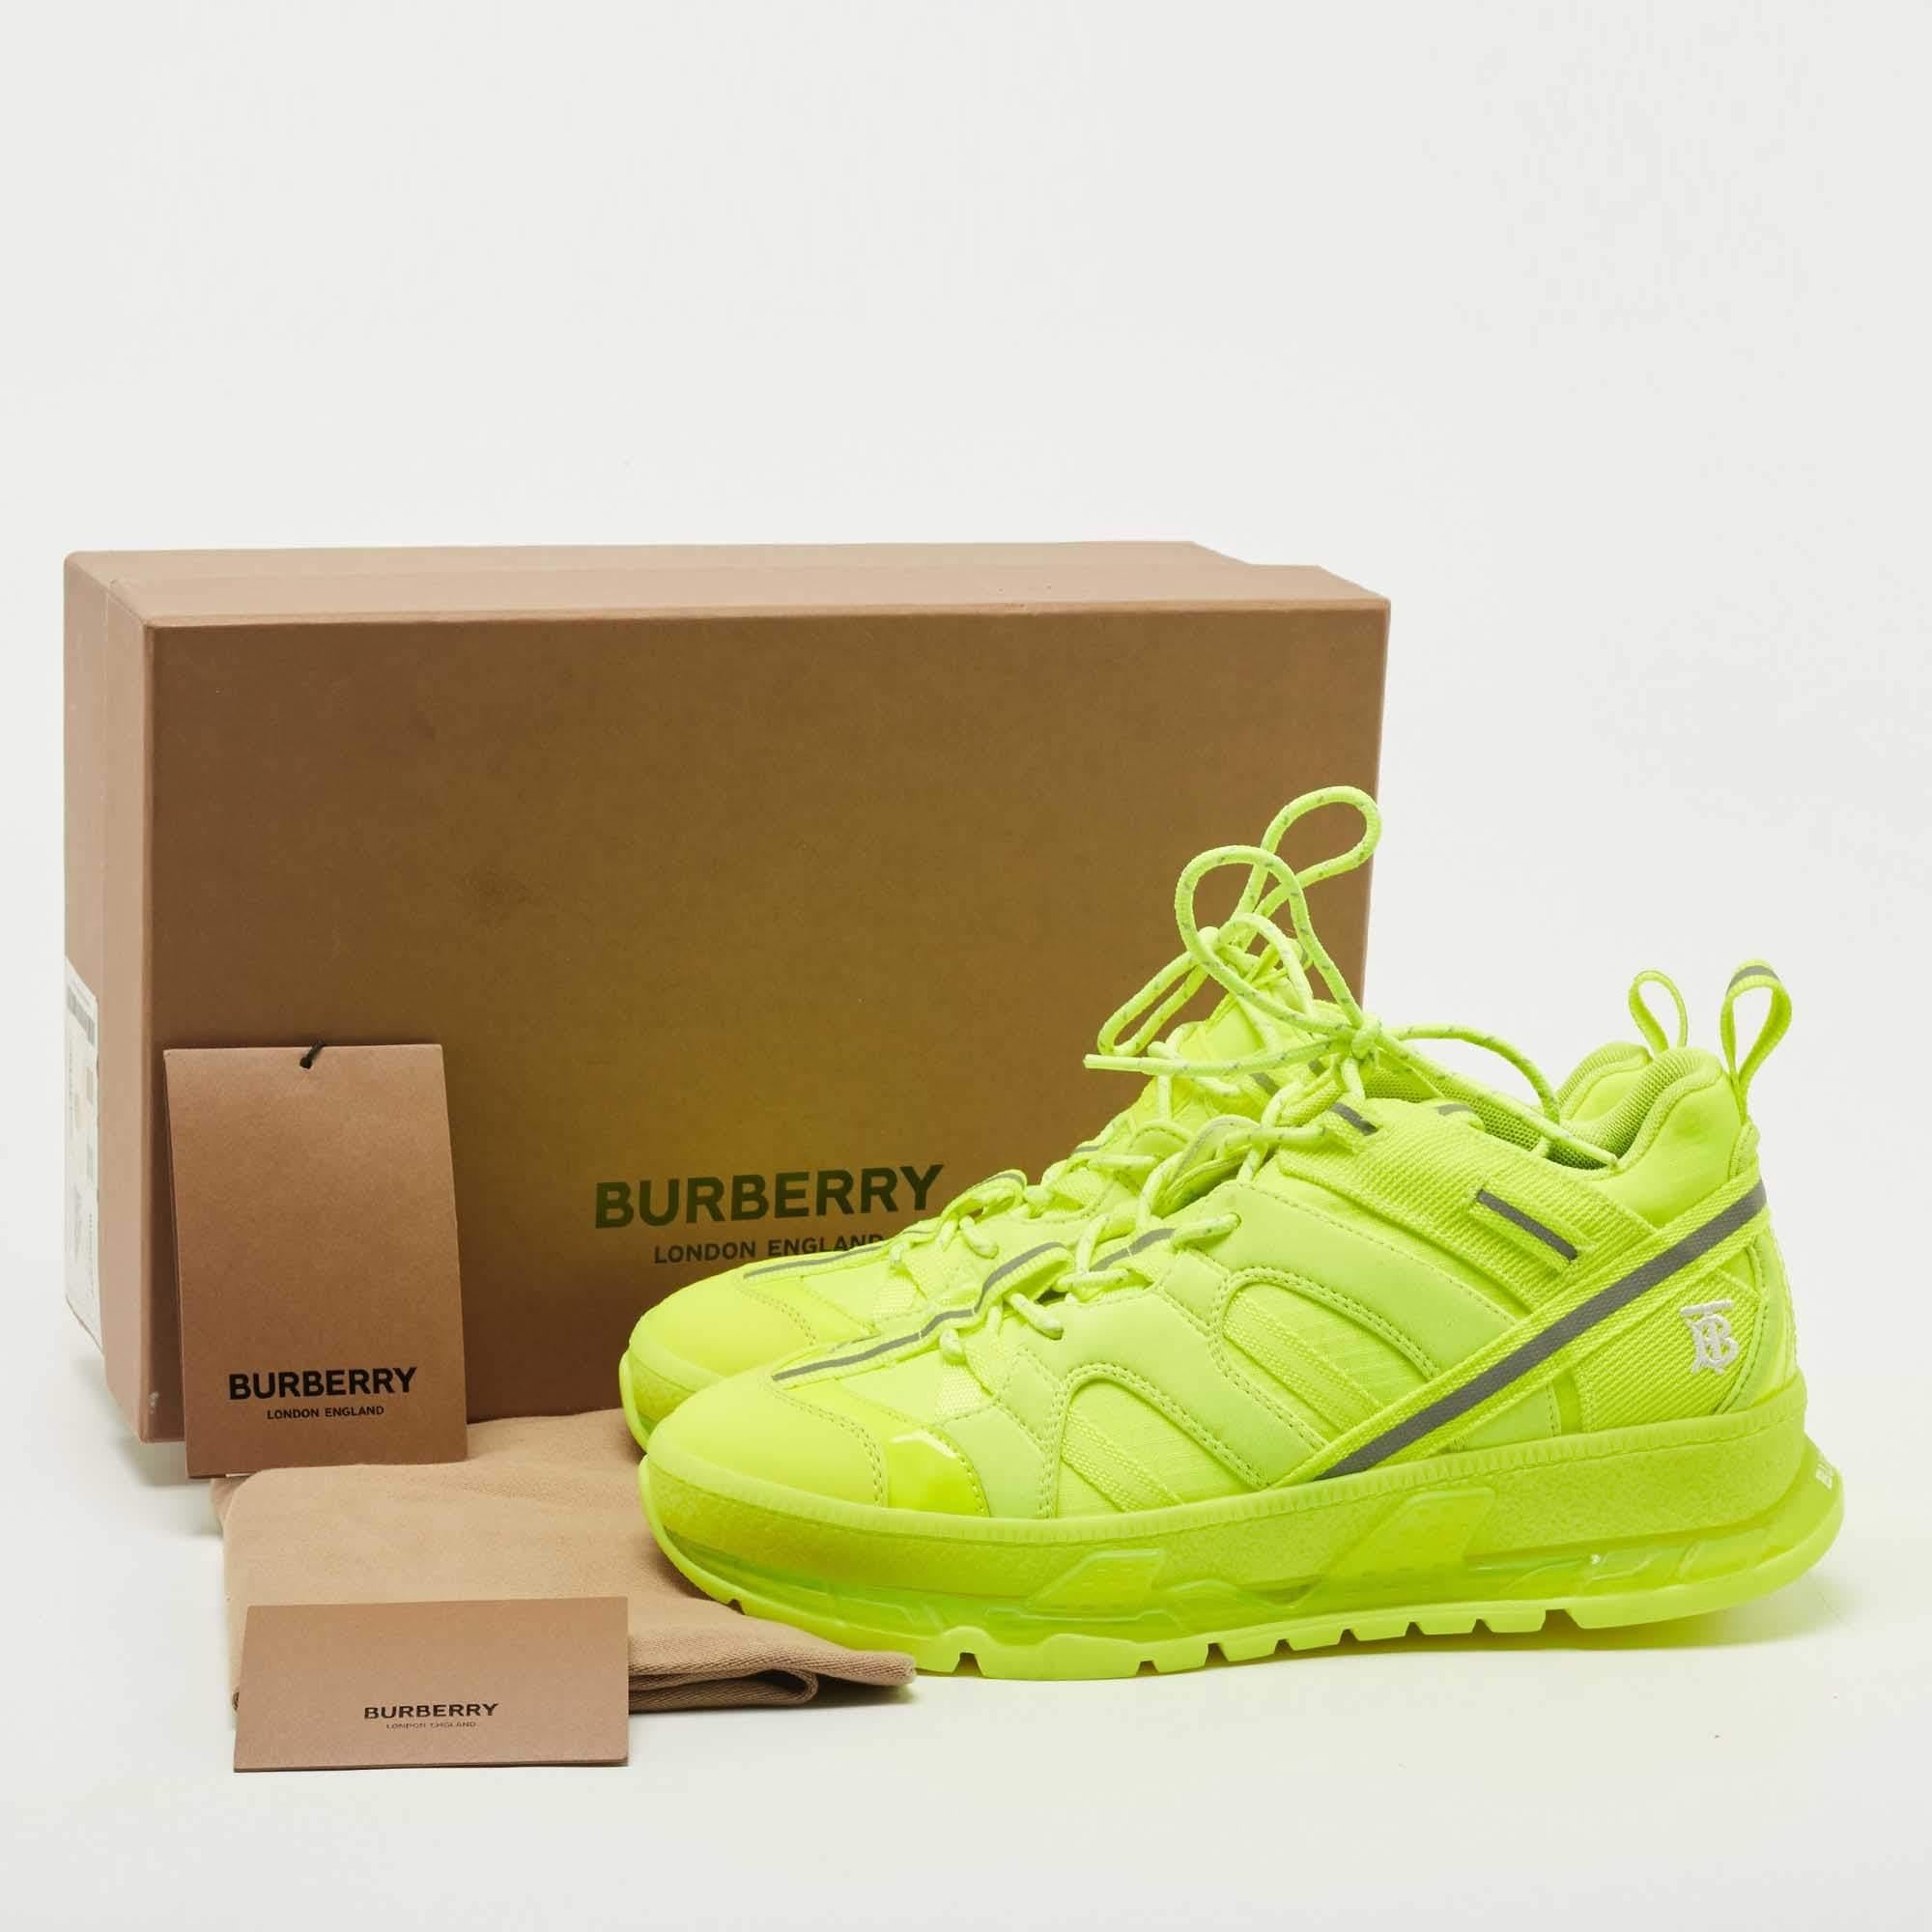 Burberry Neon Yellow Leather and Fabric Union Low Top Sneakers Size 40 2